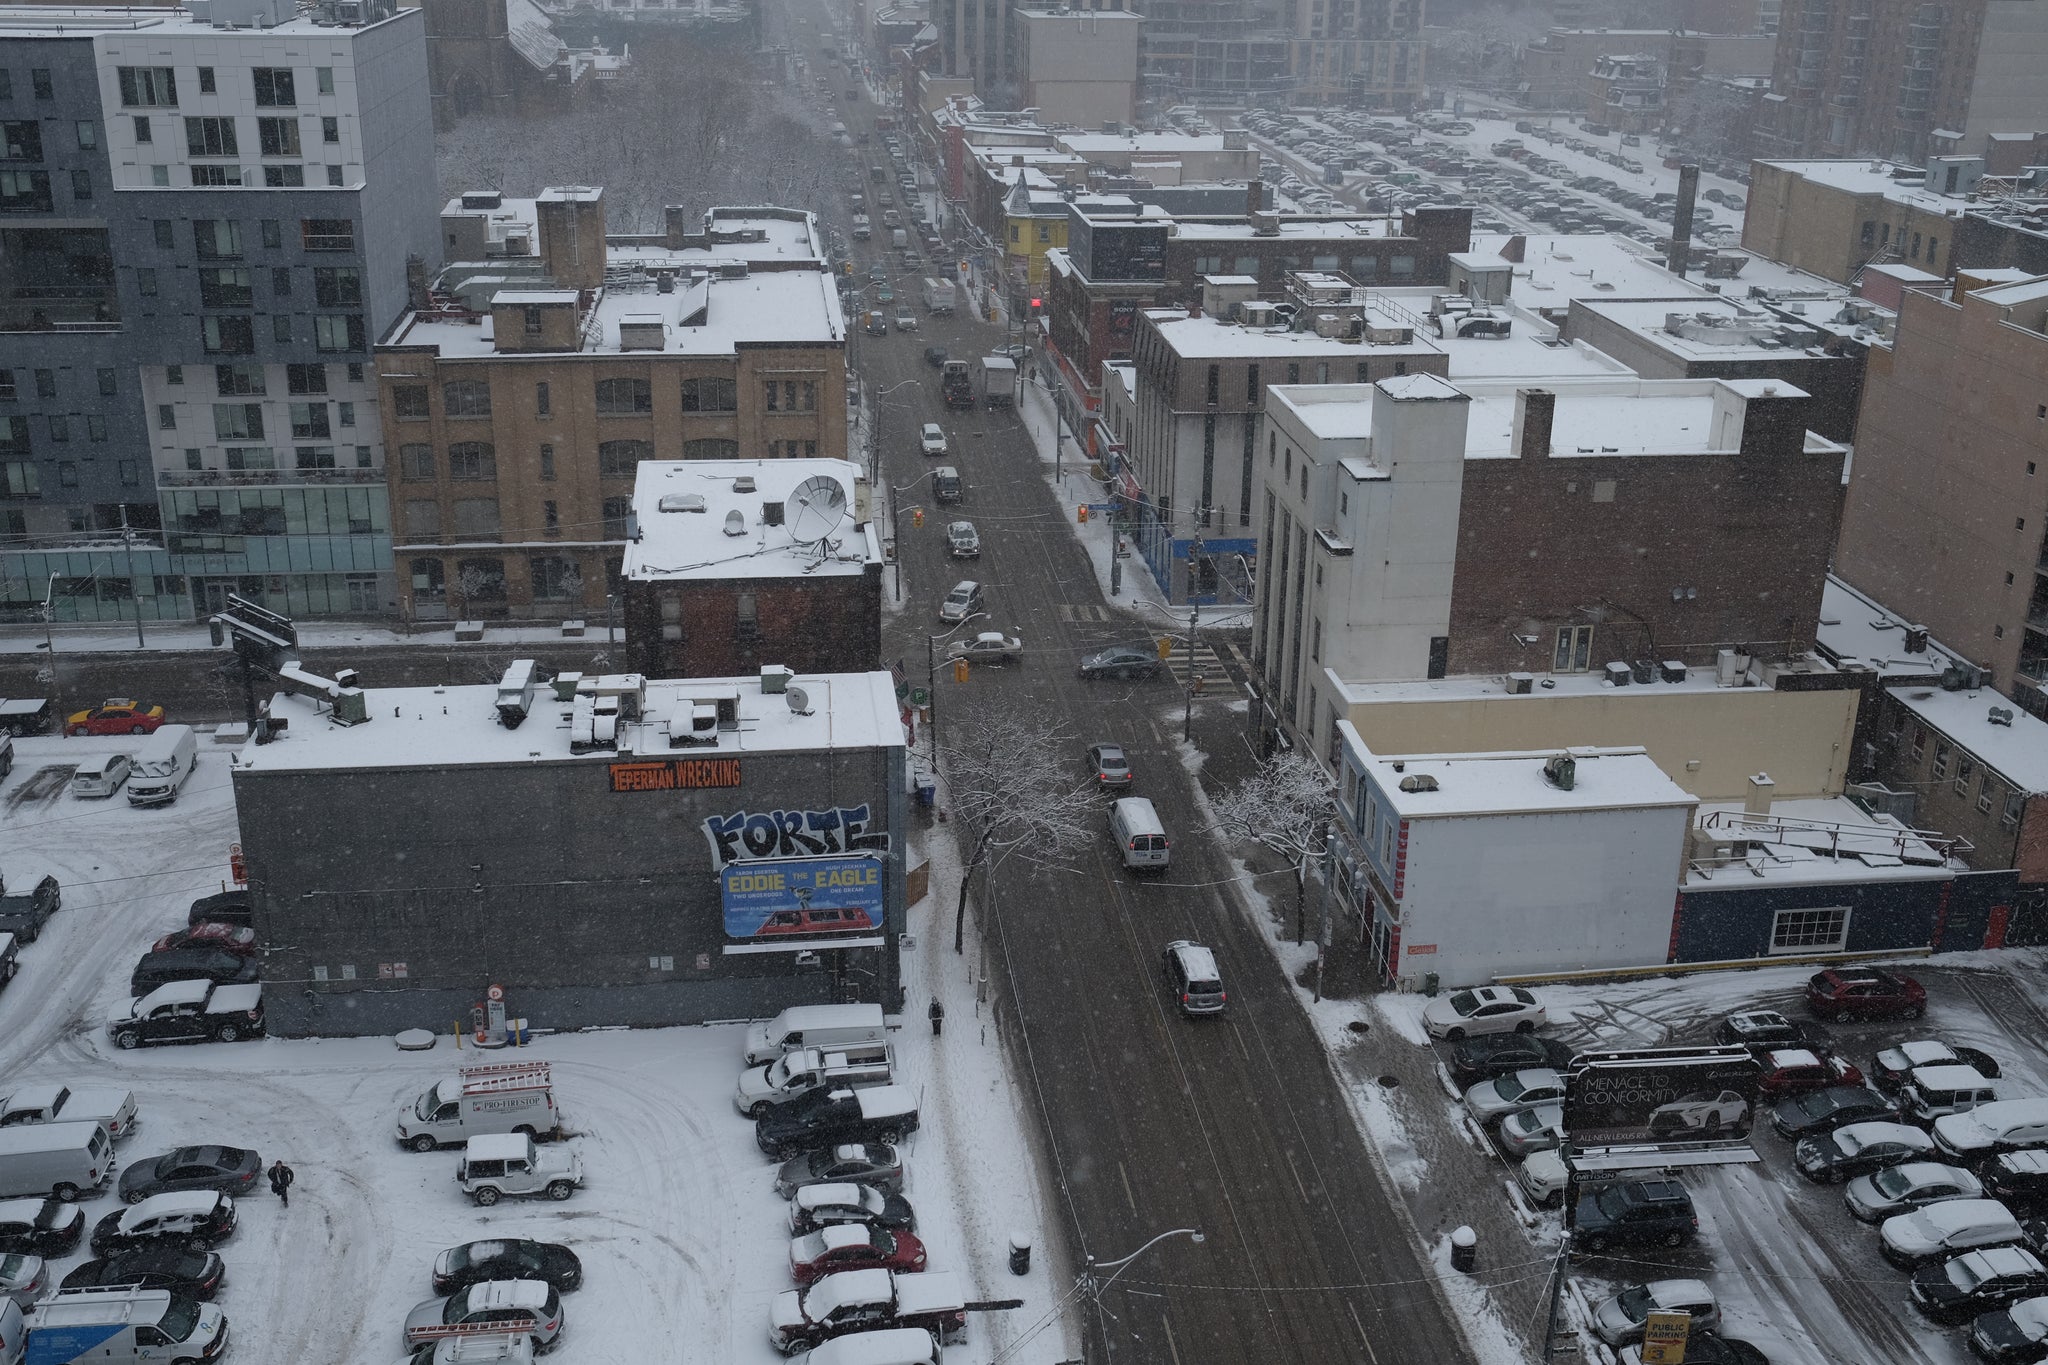 The picture shows the streets of Toronto covered with snow and cars and bicycles moving through the snow